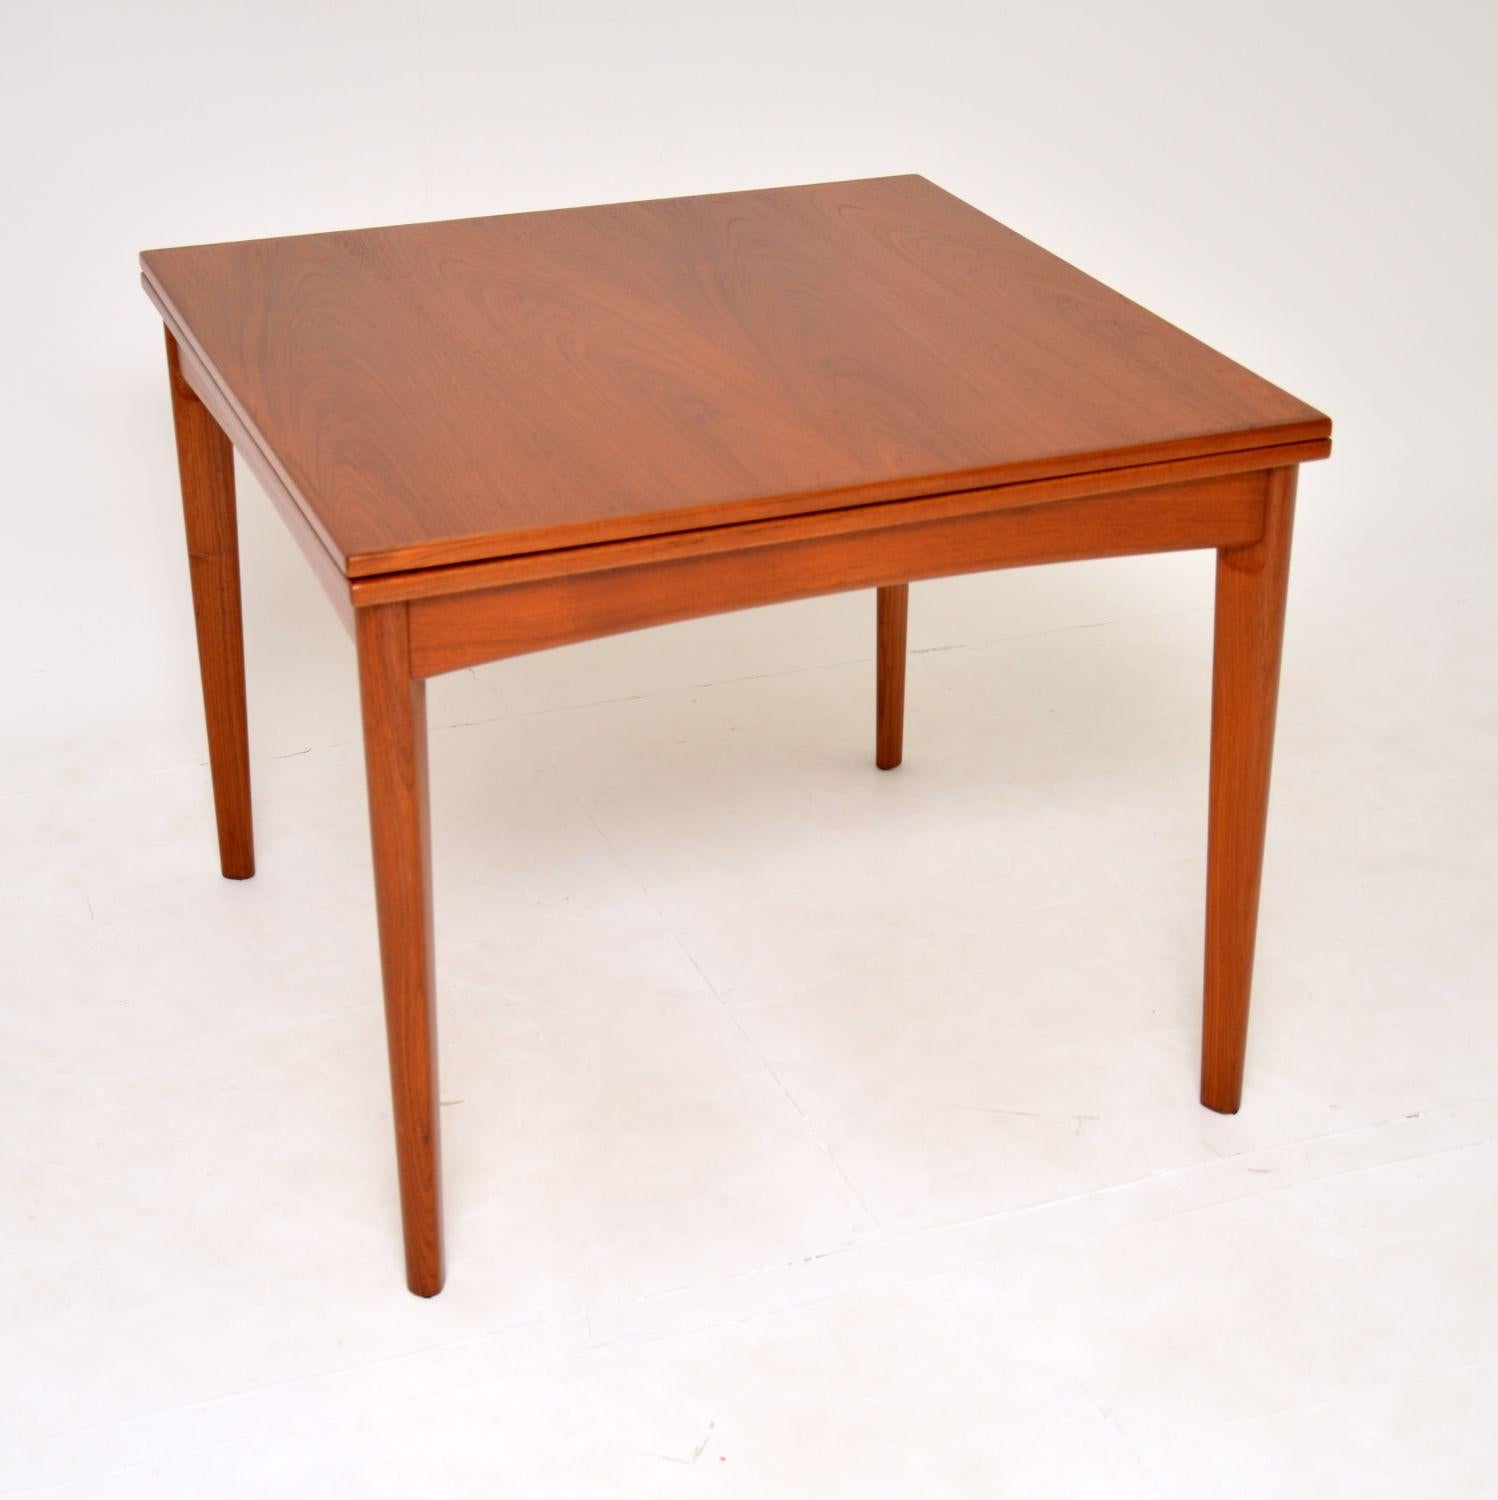 A stylish and very well made vintage Danish dining table in teak. This was made in Denmark, it dates from the 1960’s.

It is of super quality, with a clever mechanism to open it out and double the size. The top swivels round on a pivot and unfolds